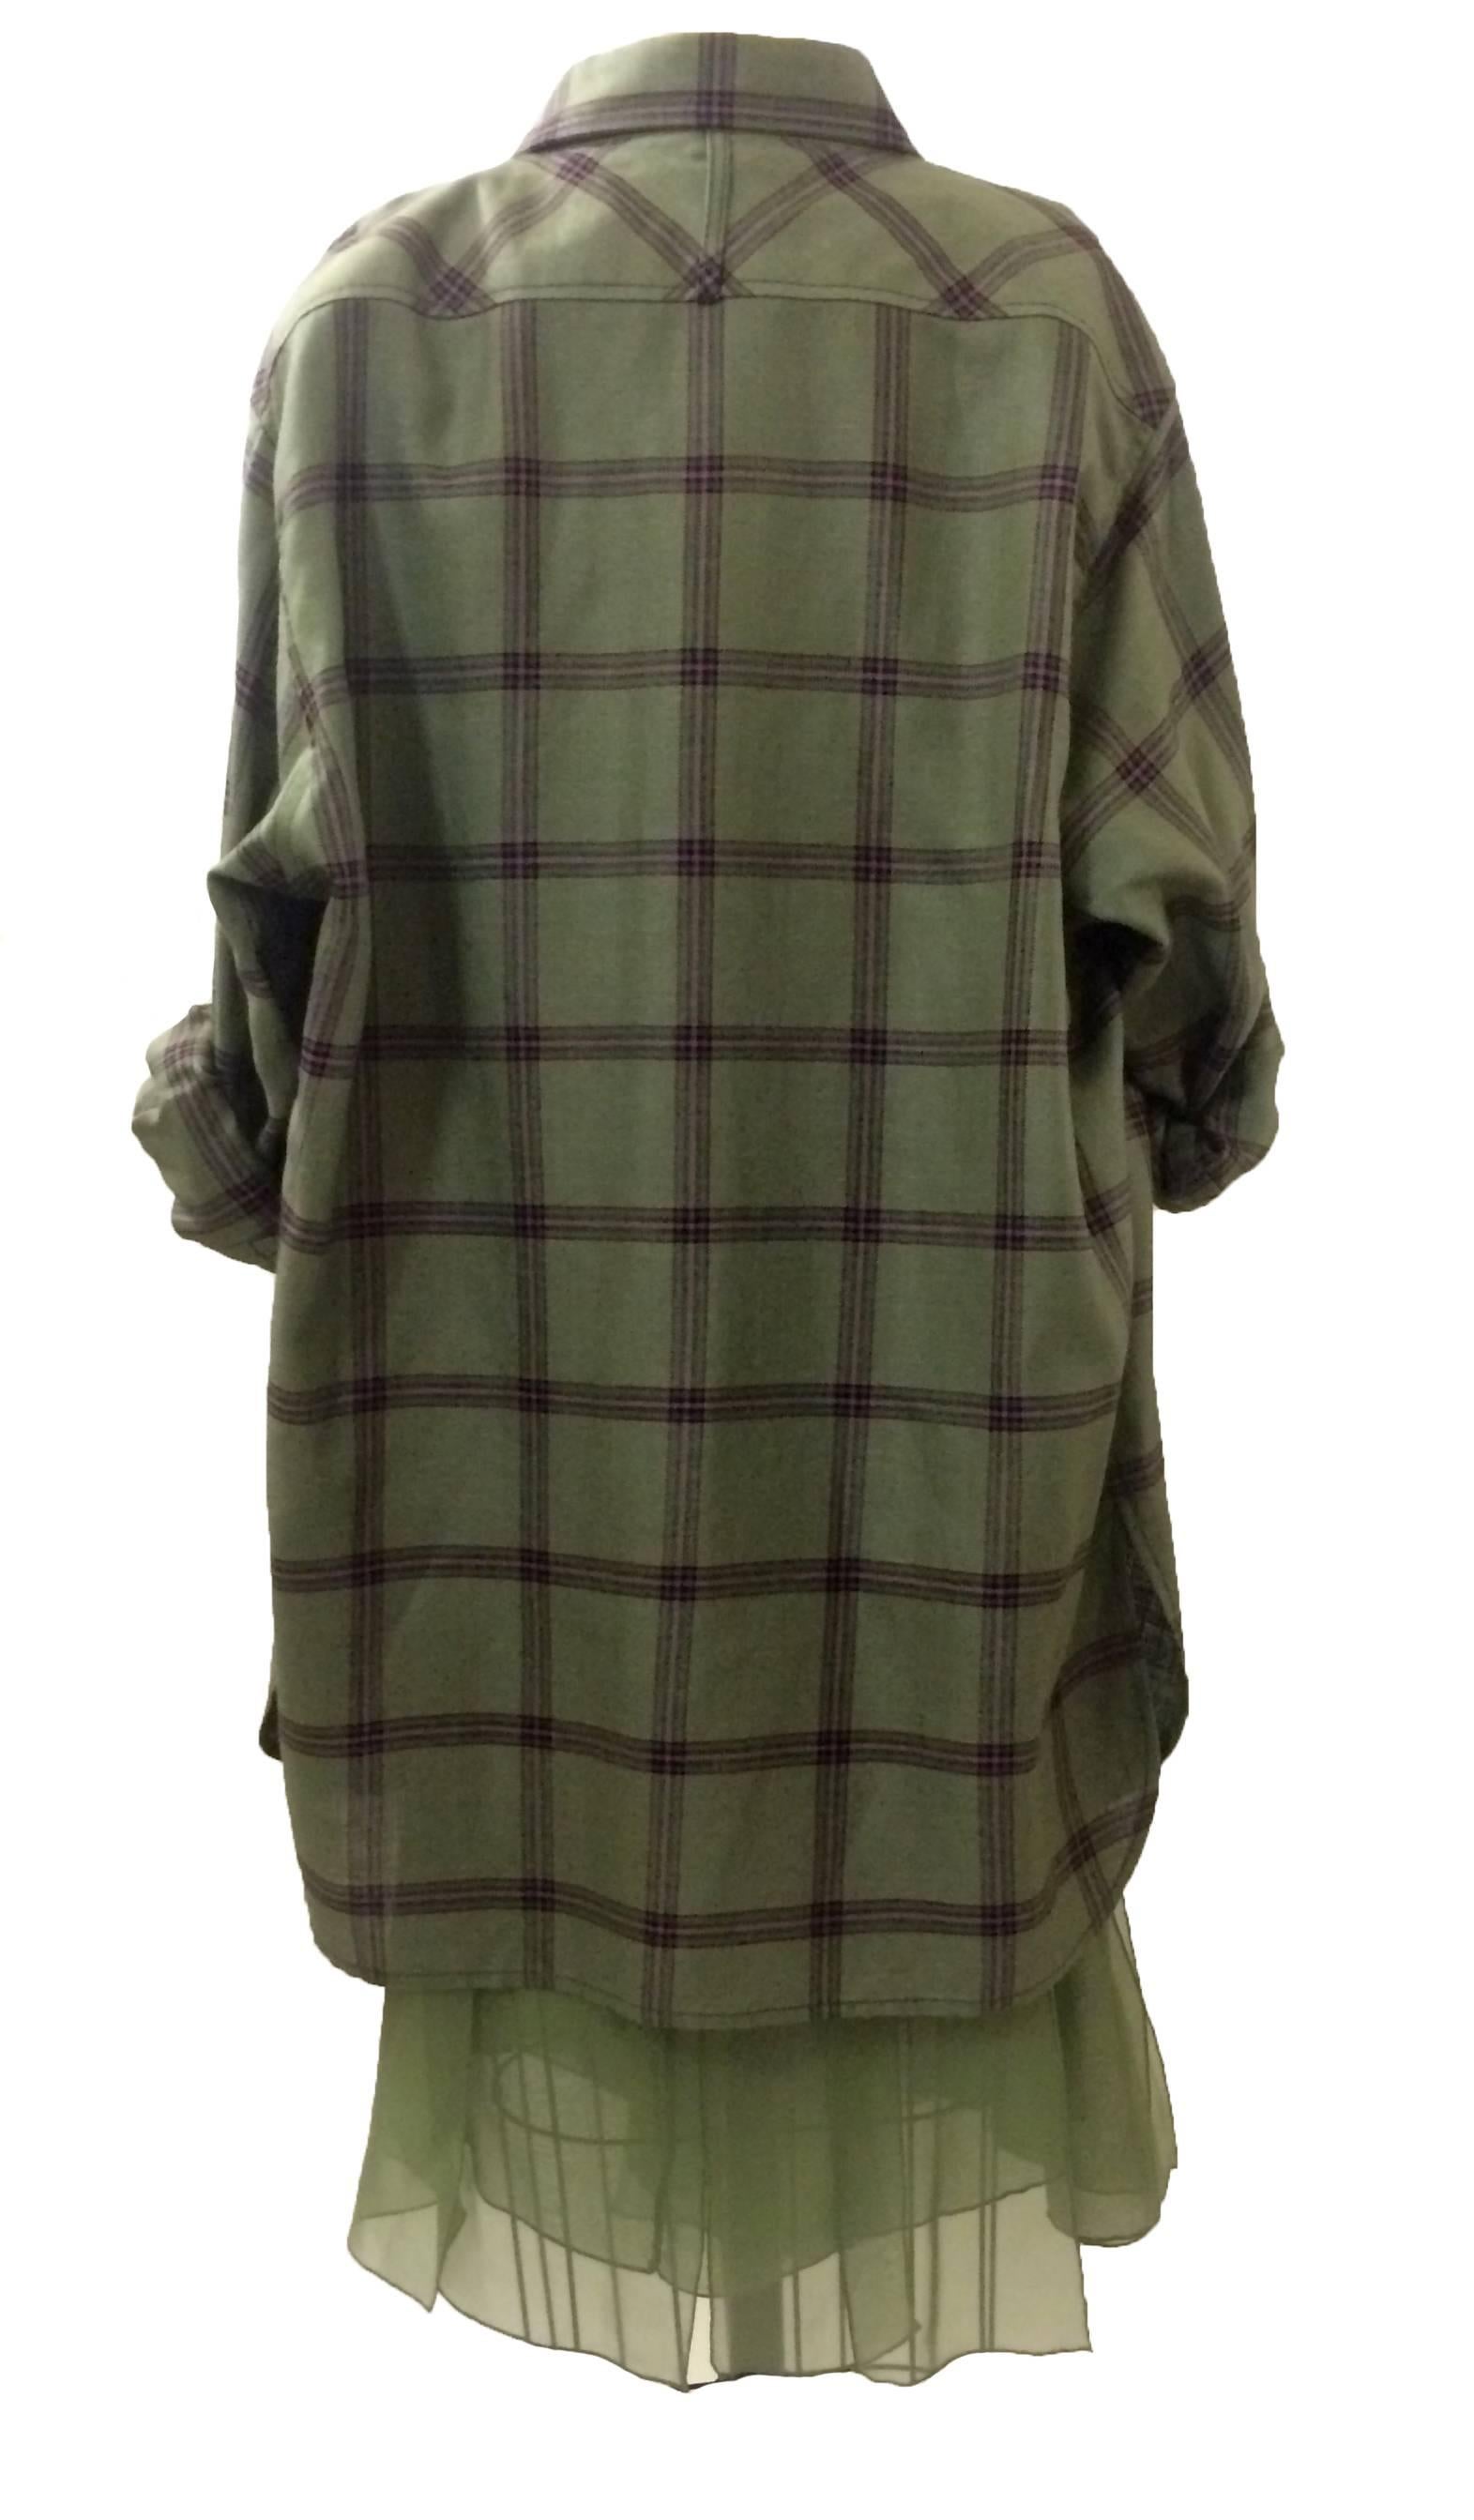 Vintage 1990s Galanos three piece set in sage green, with a plaid jacket and silk chiffon skirt and cape-style top with slit sides. 

Top is comprised of three layers of silk chiffon with open sides. (Semi-sheer.)
Skirt is made of silk chiffon